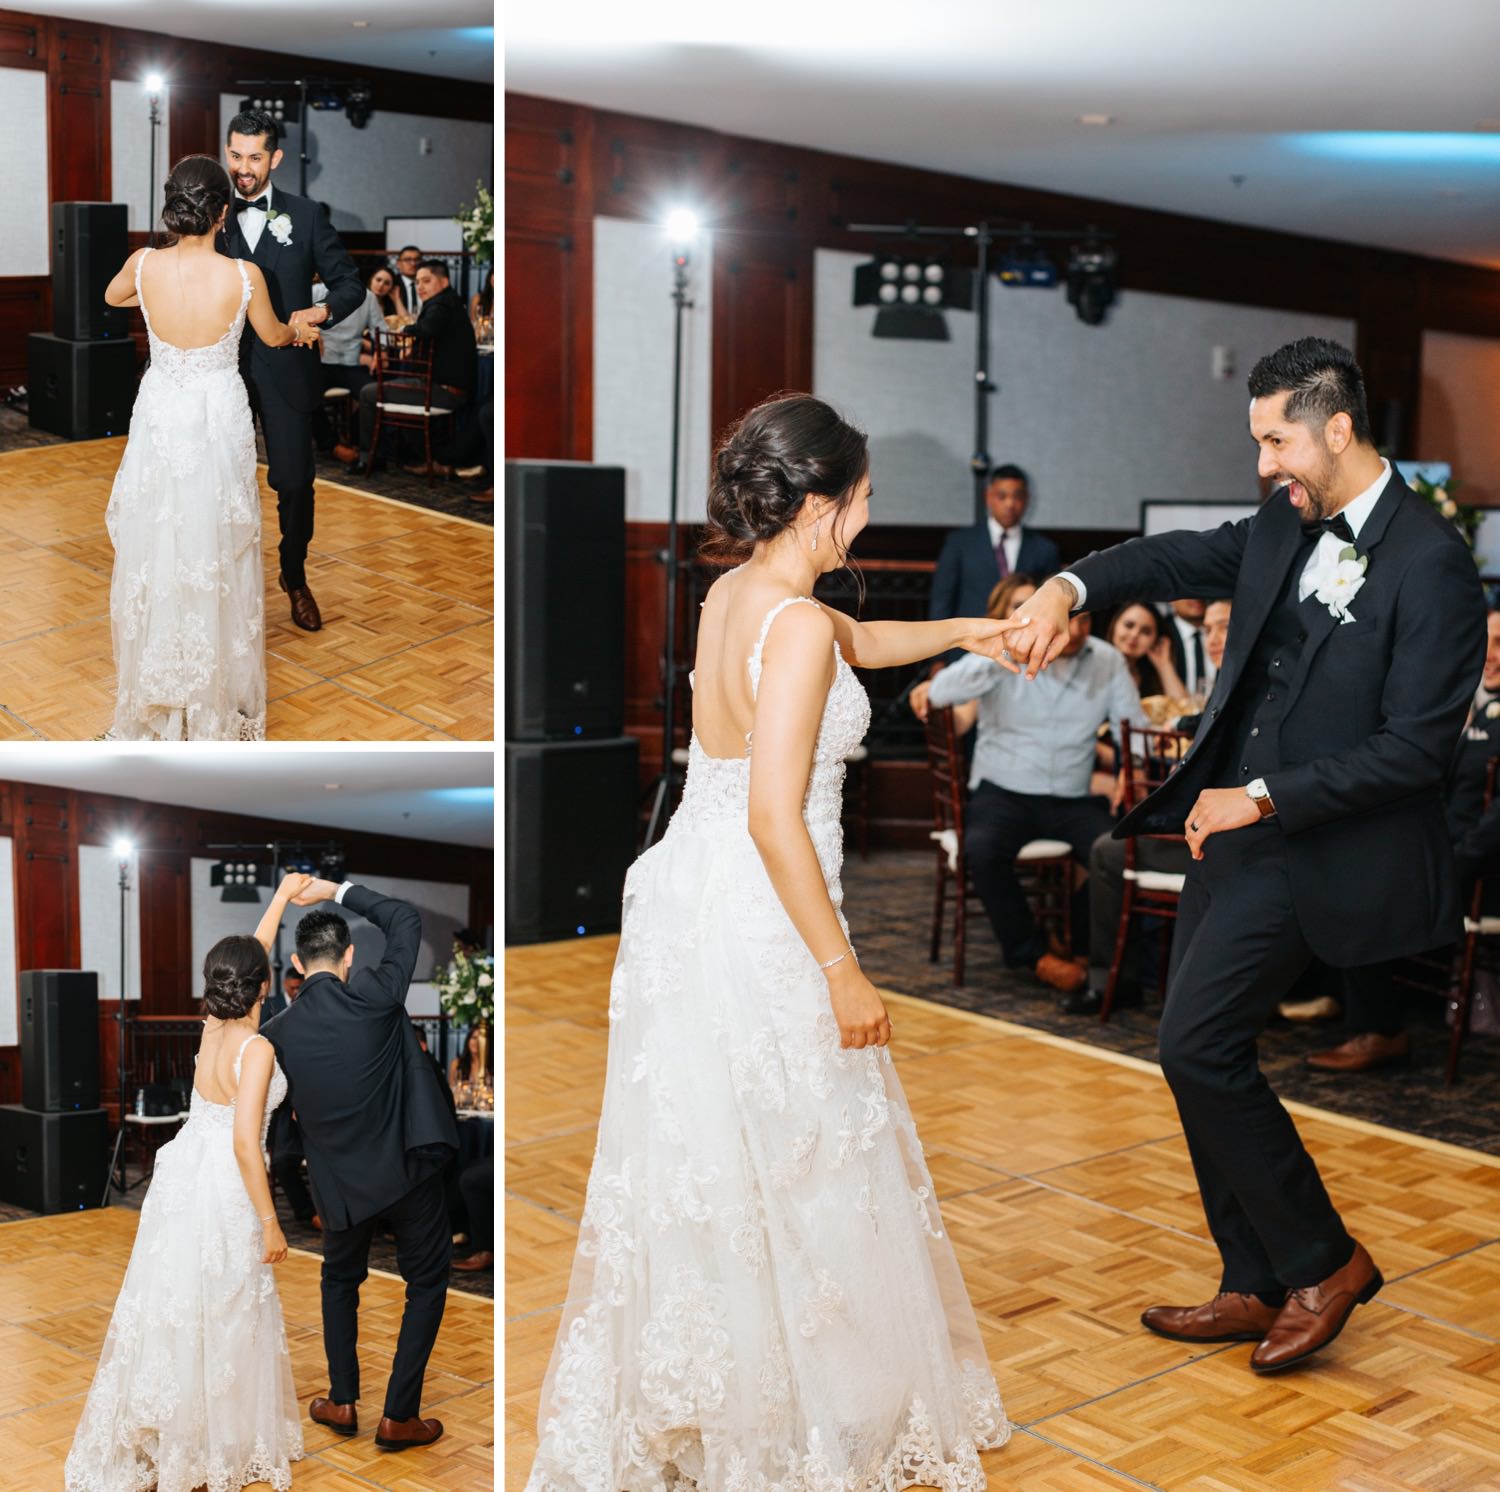 Bride and Groom First Dance - Romantic First Dance between Bride and Groom - https://brittneyhannonphotography.com